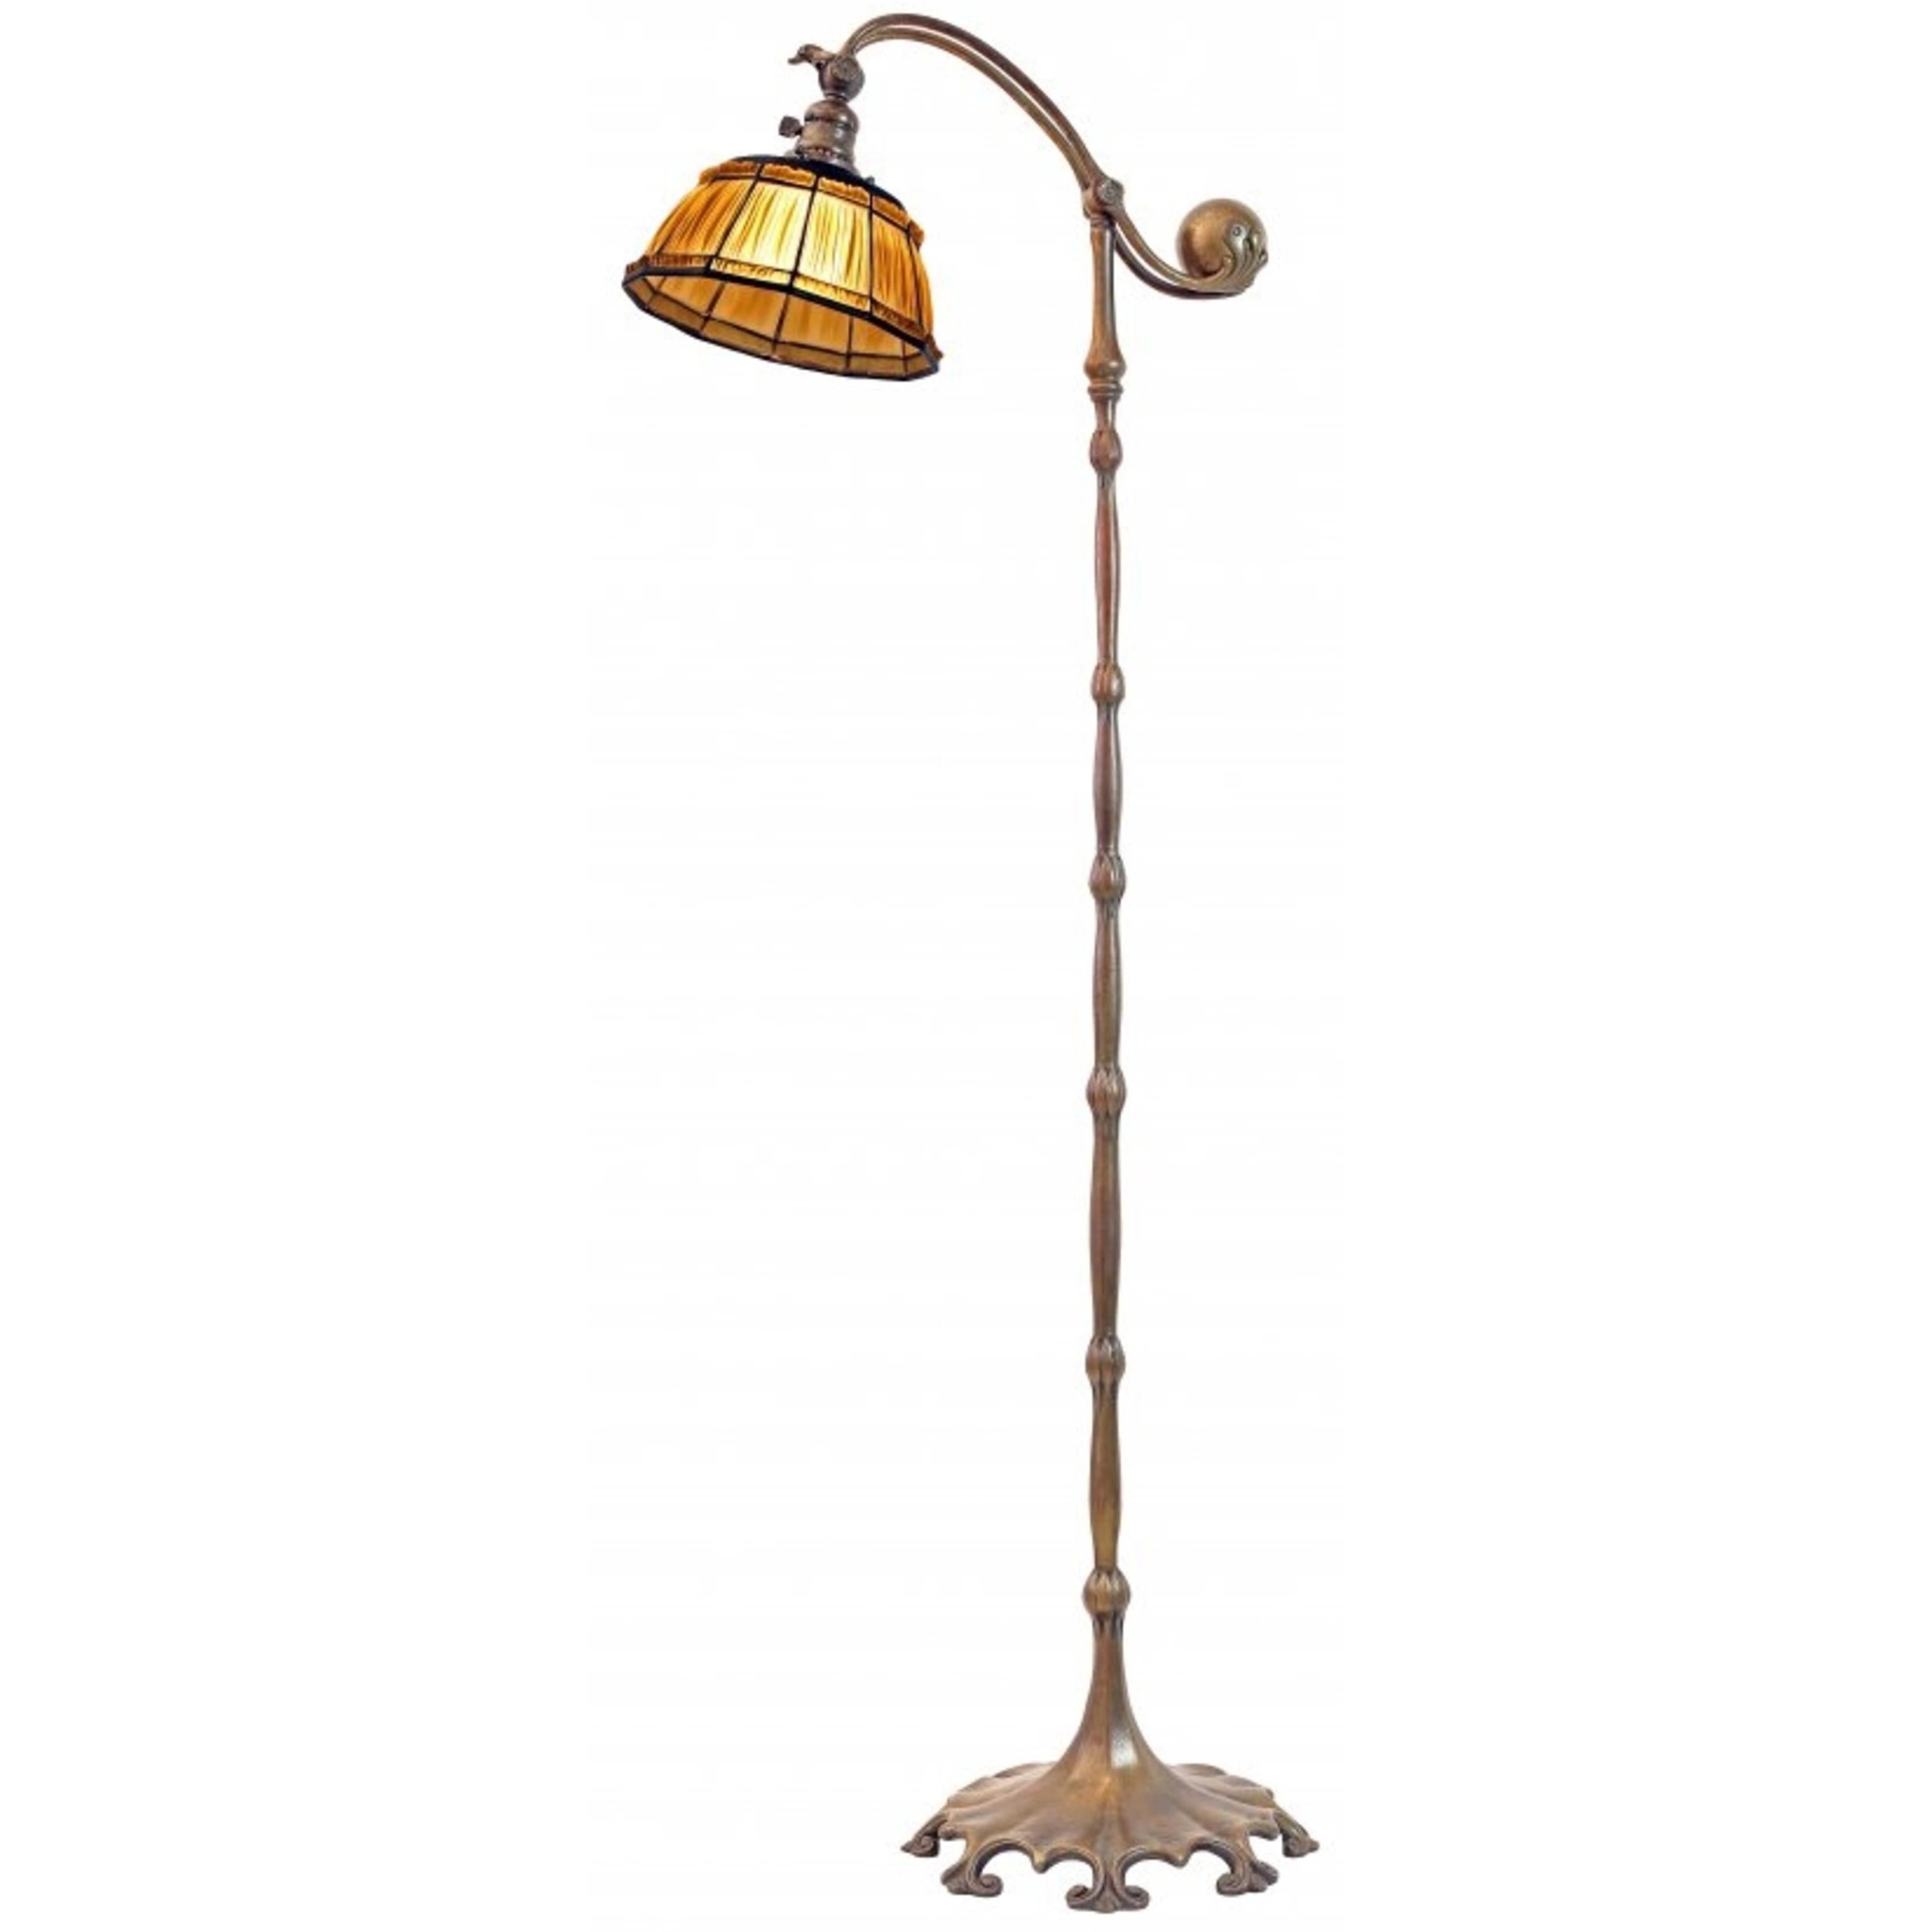 Tiffany Favrile Glass and Bronze Linenfold Counter-Balance Floor Lamp